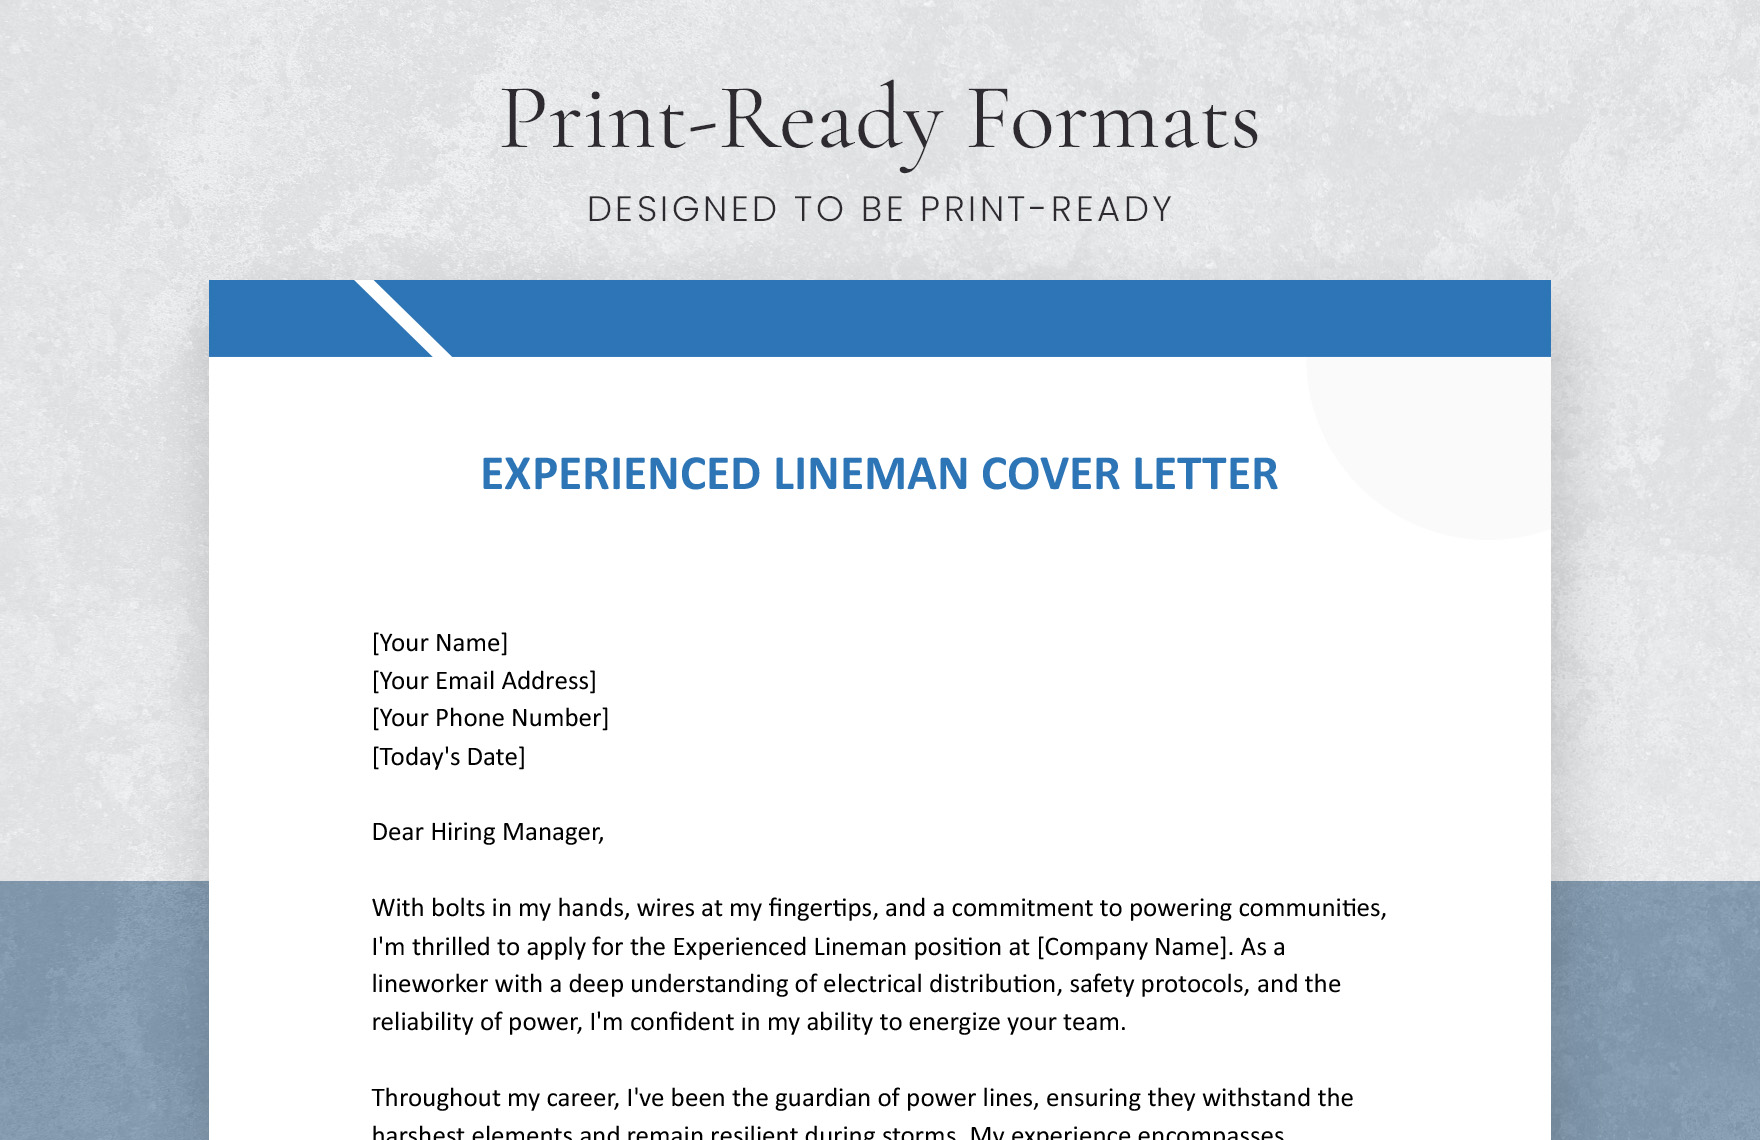 Experienced Lineman Cover Letter